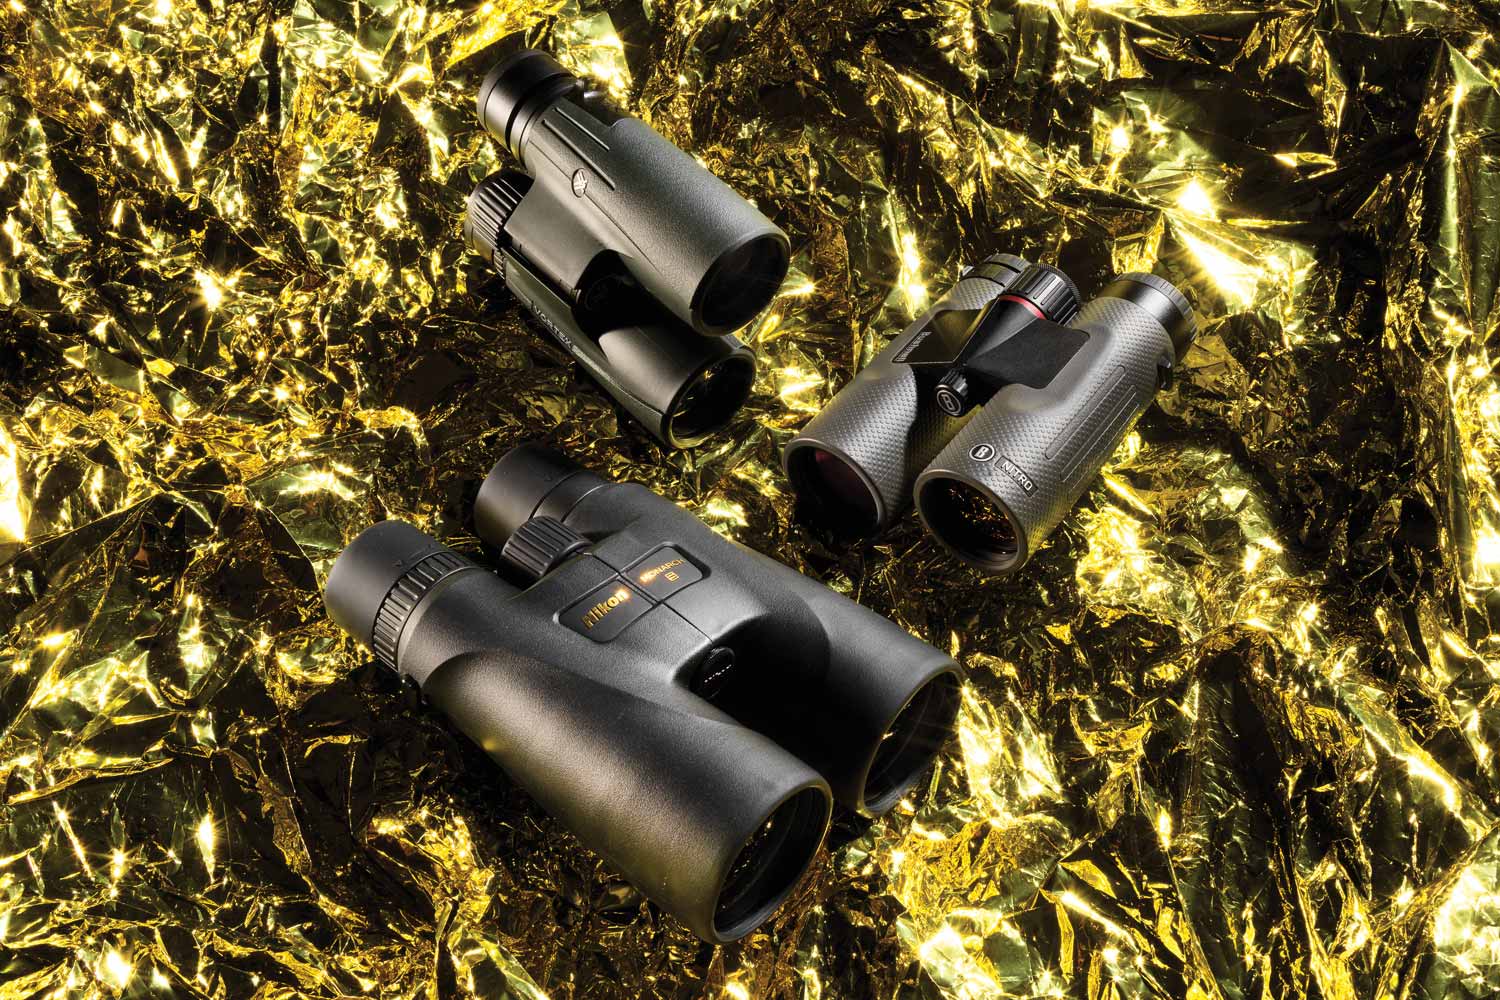 Pick the right pair of binoculars for your viewing needs